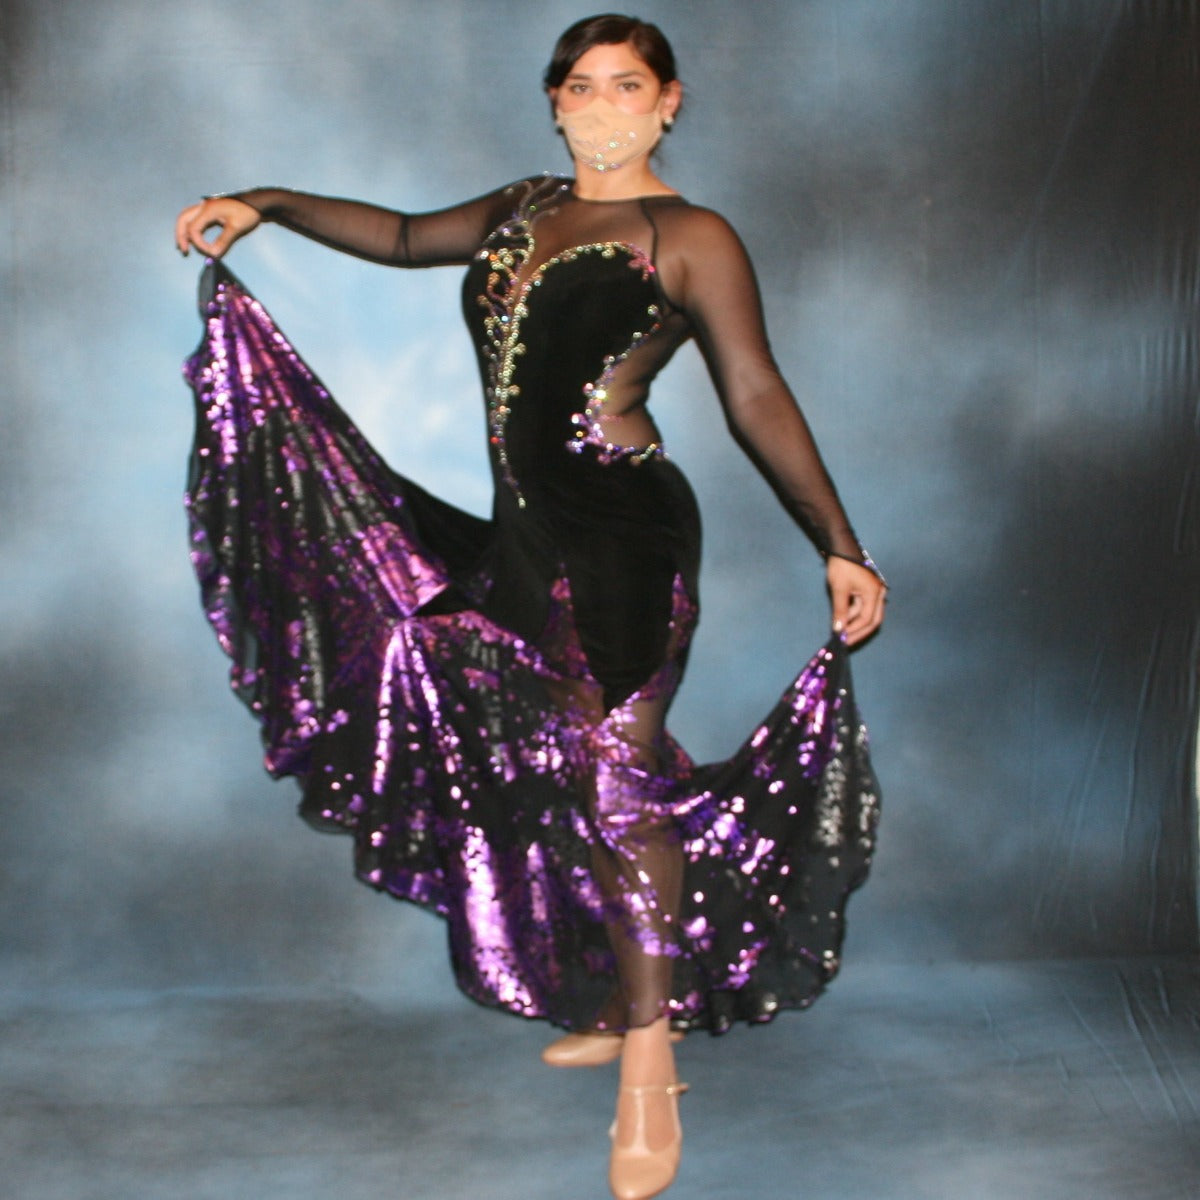 Crystal's Creations Black ballroom dance dress with purple accents was created in luxurious black solid slinky on stretch mesh base figure contouring bodysuit, featuring yards of black & purple metallic print chiffon, enhanced with intricately detailed tanzinite & vitrail light Swarovski rhinestone work.